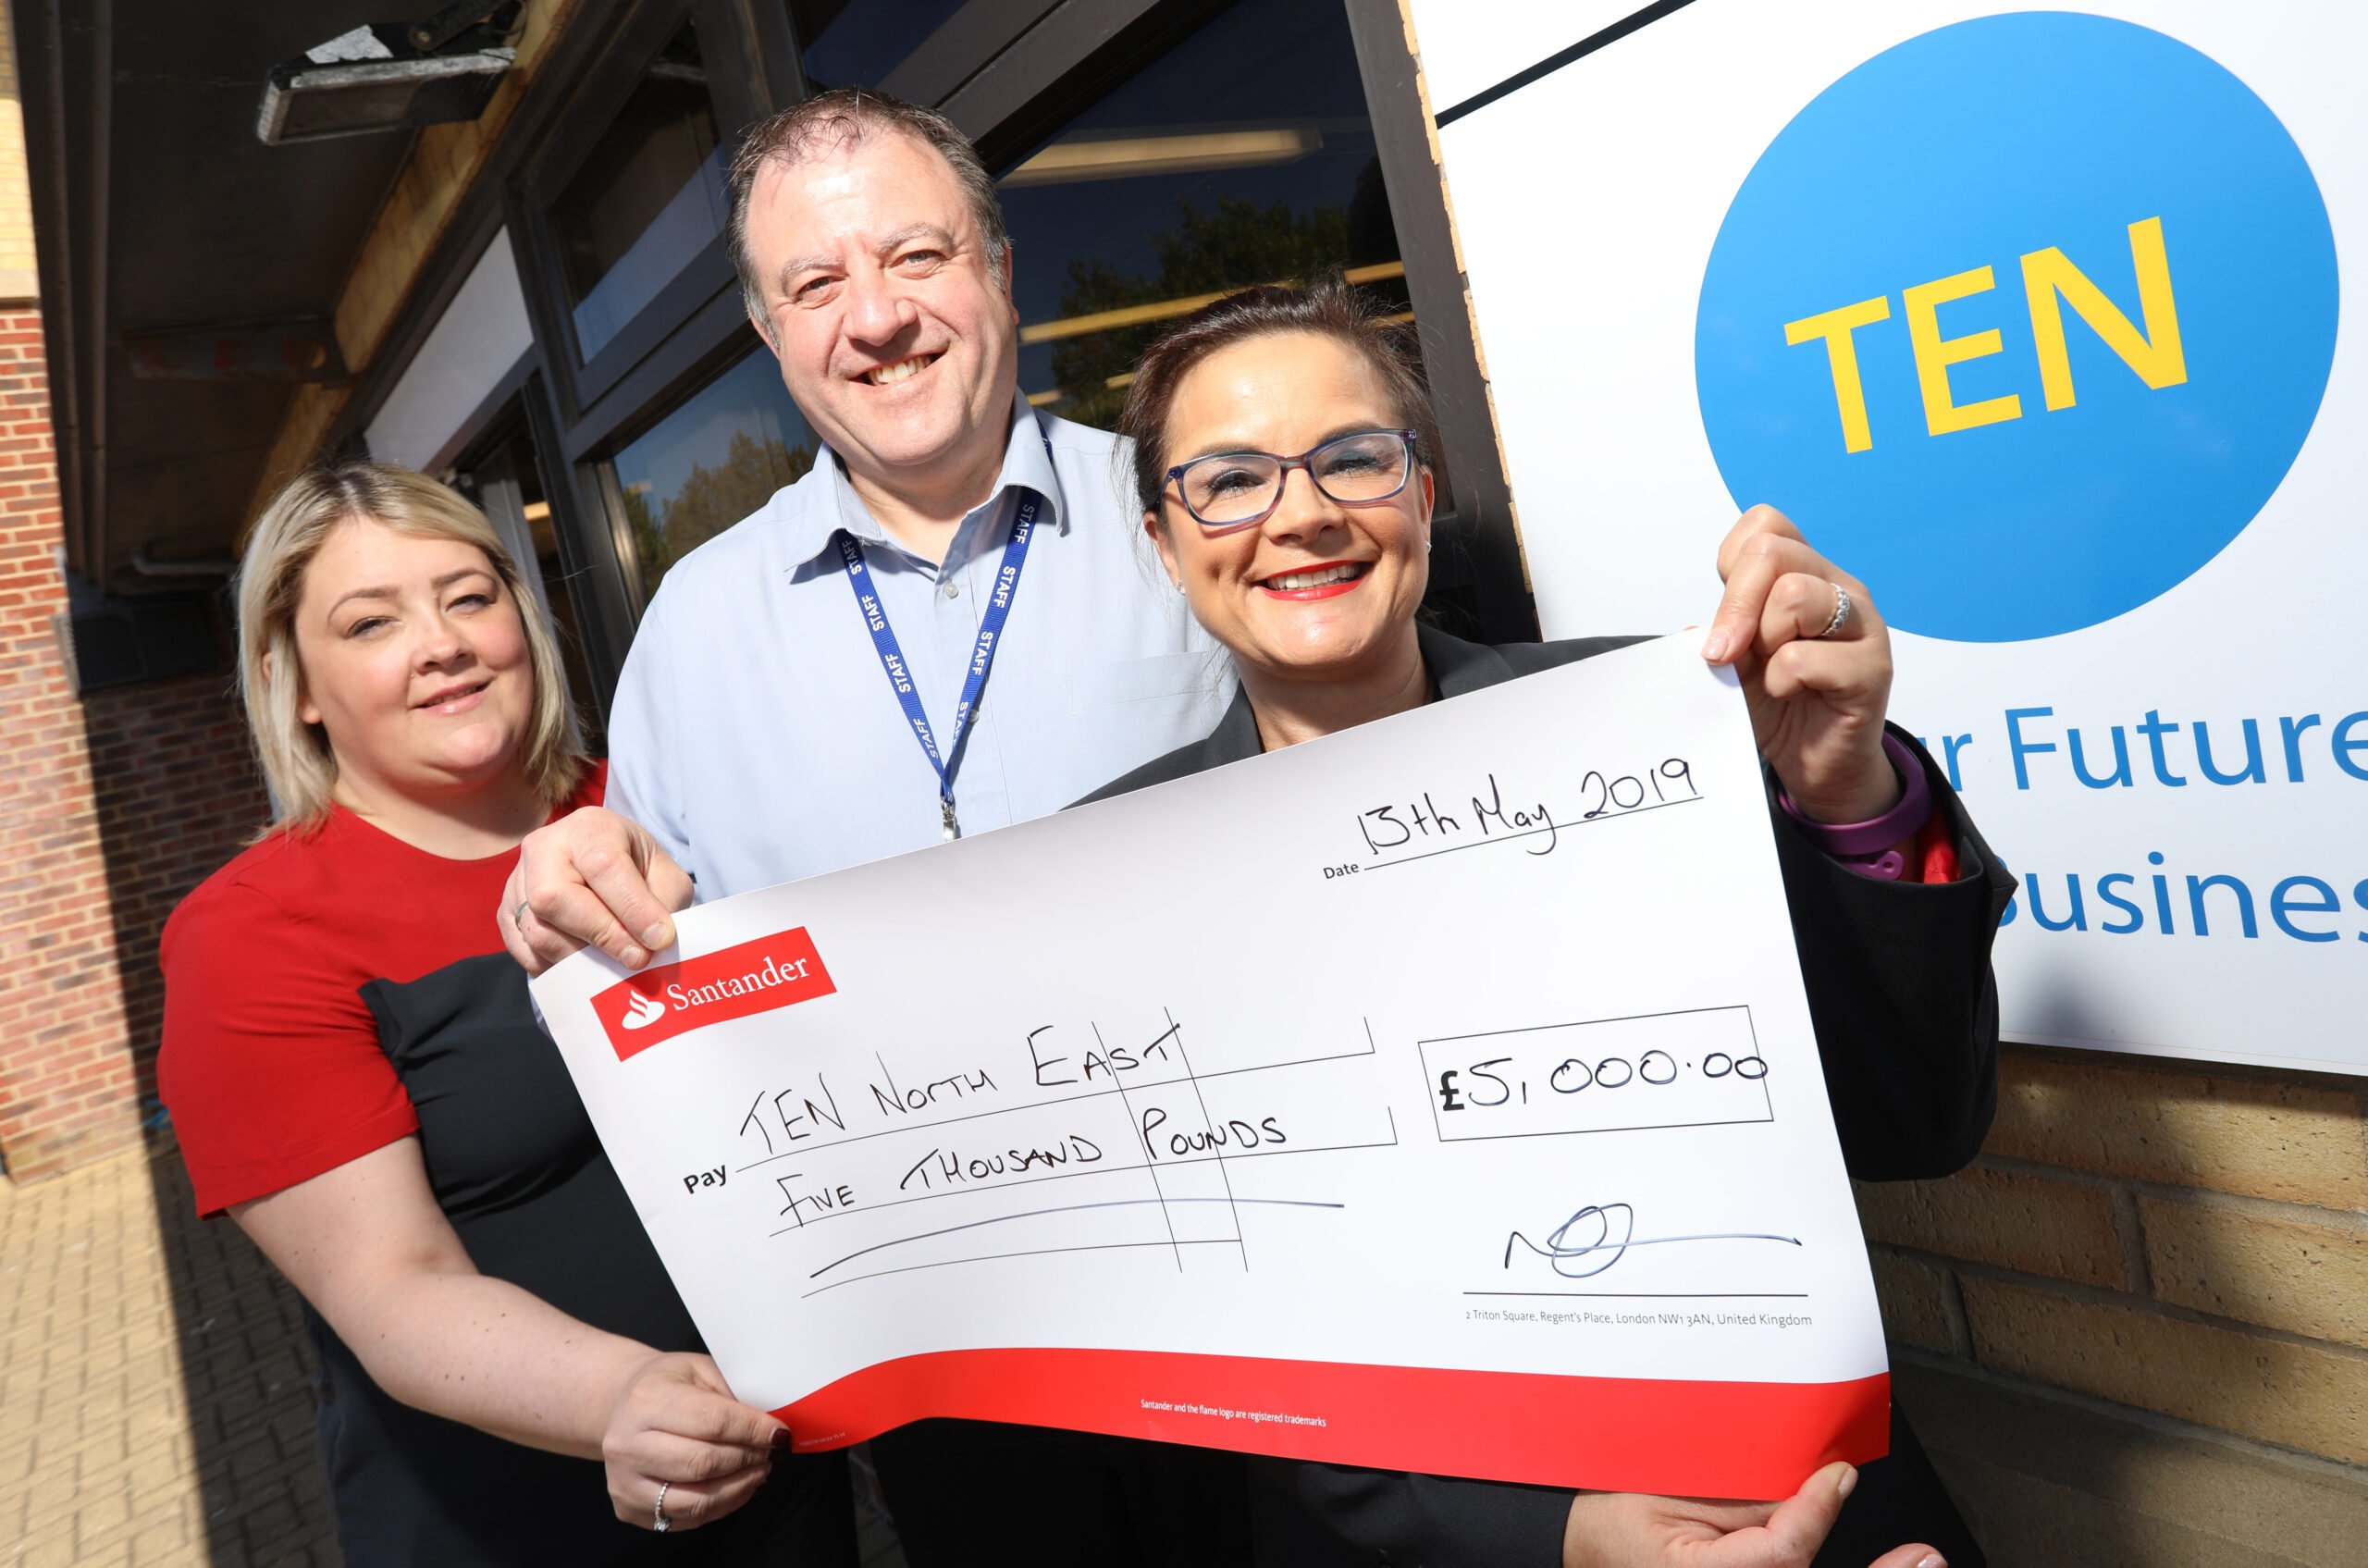 TEN NORTH EAST TO LAUNCH JOB CLUB